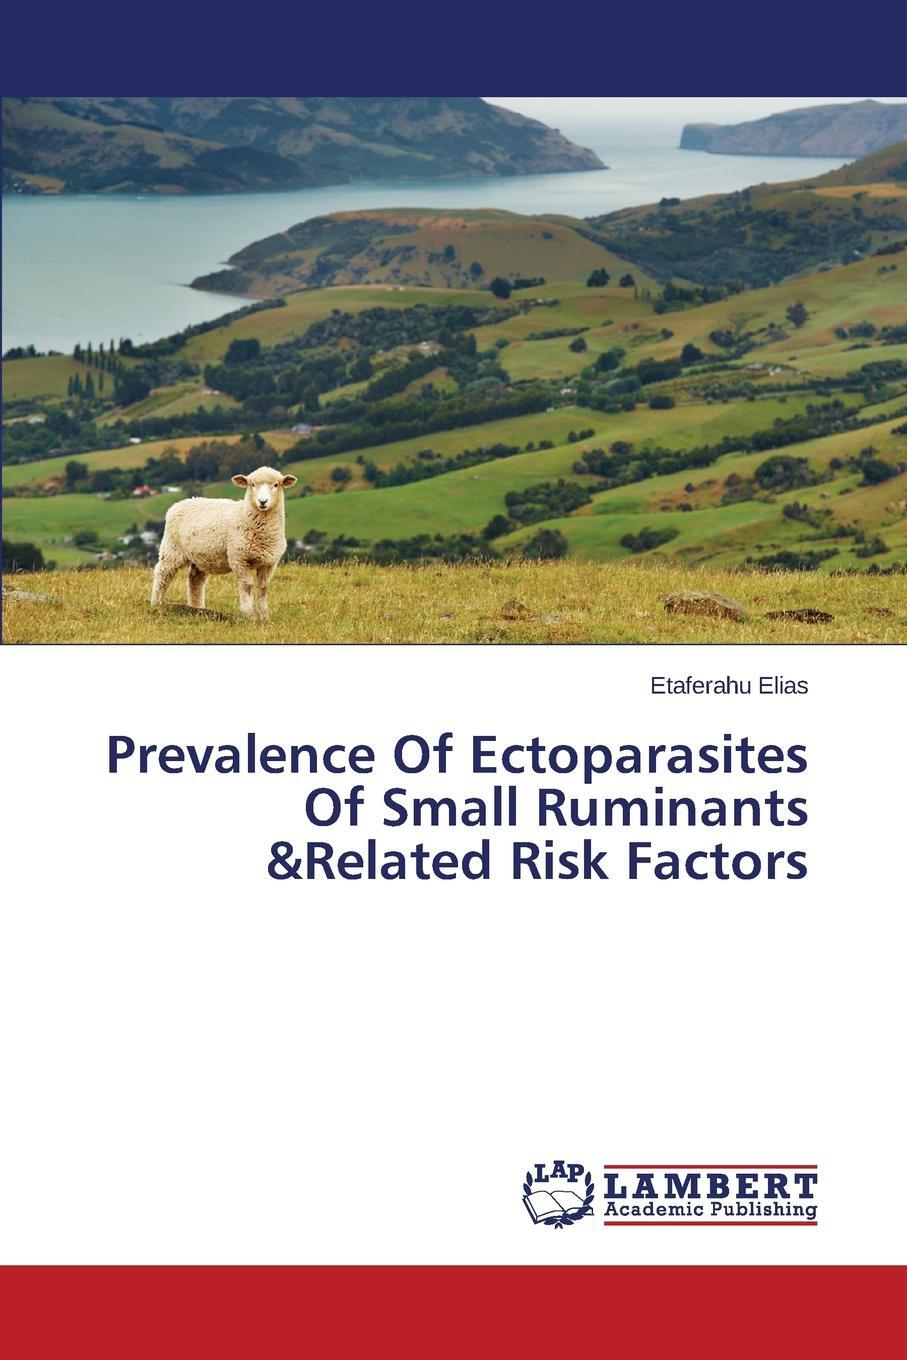 фото Prevalence Of Ectoparasites Of Small Ruminants &Related Risk Factors